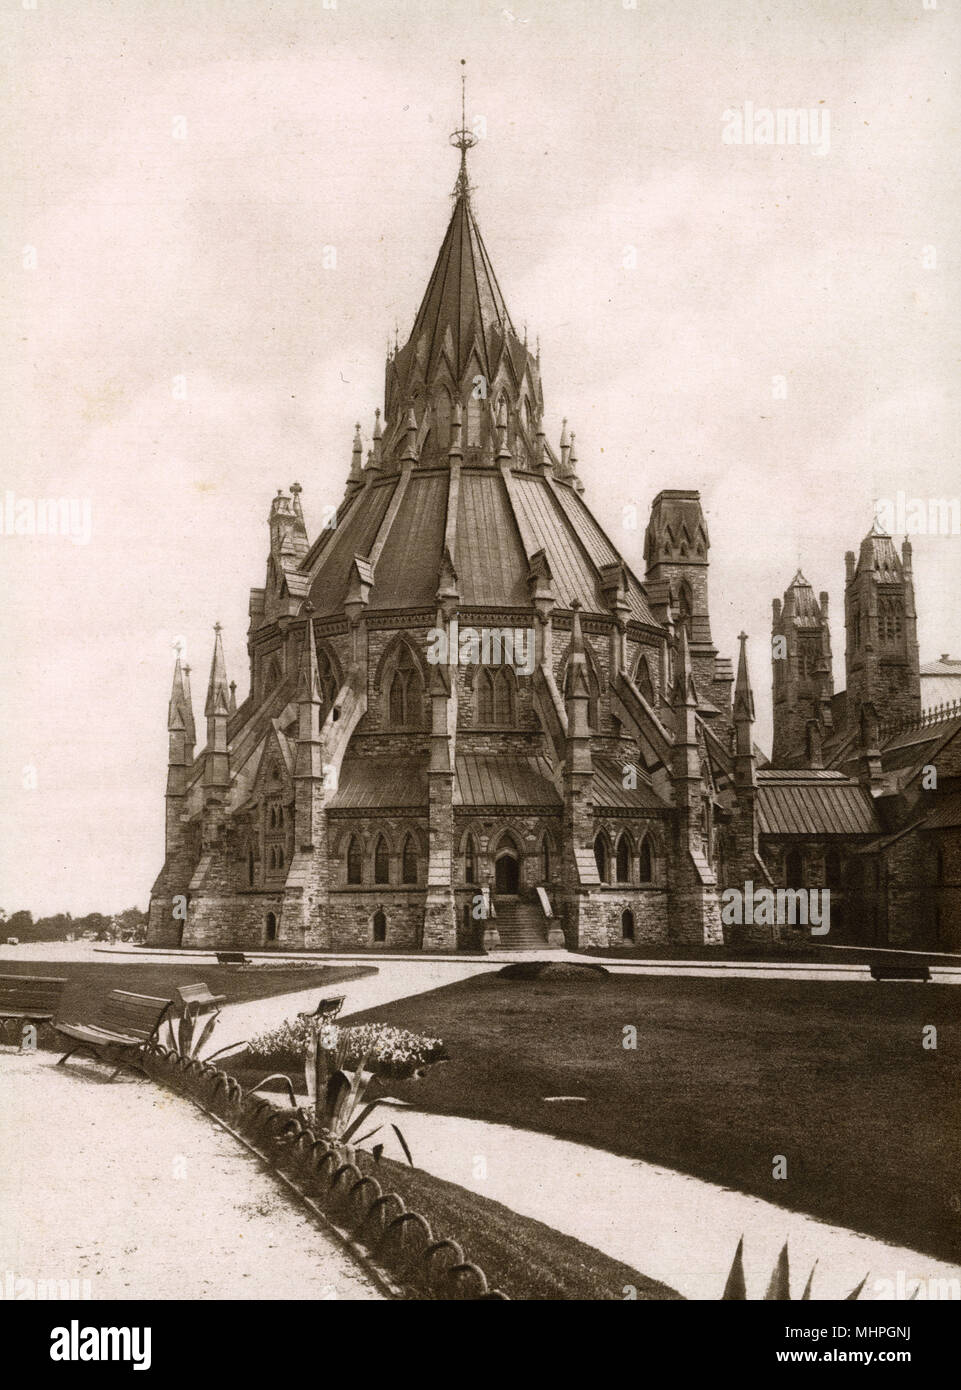 Parliament Library, Parliament Hill, Ottawa, Ontario, Canada, built in the style of a chapter house.     Date: circa 1910 Stock Photo